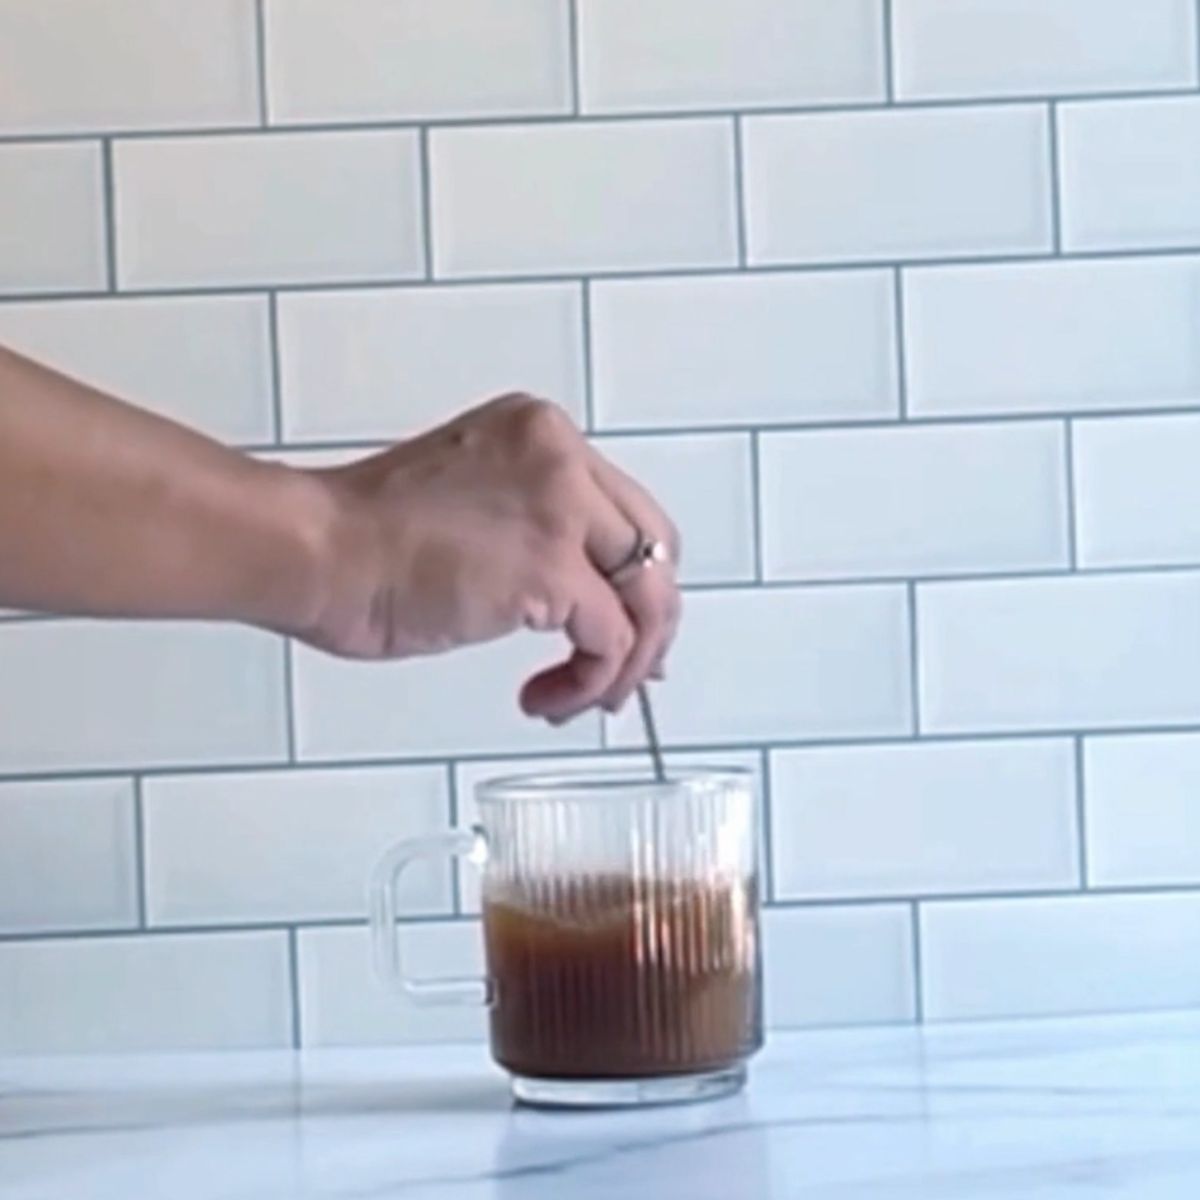 Stirring simple syrup and coffee together